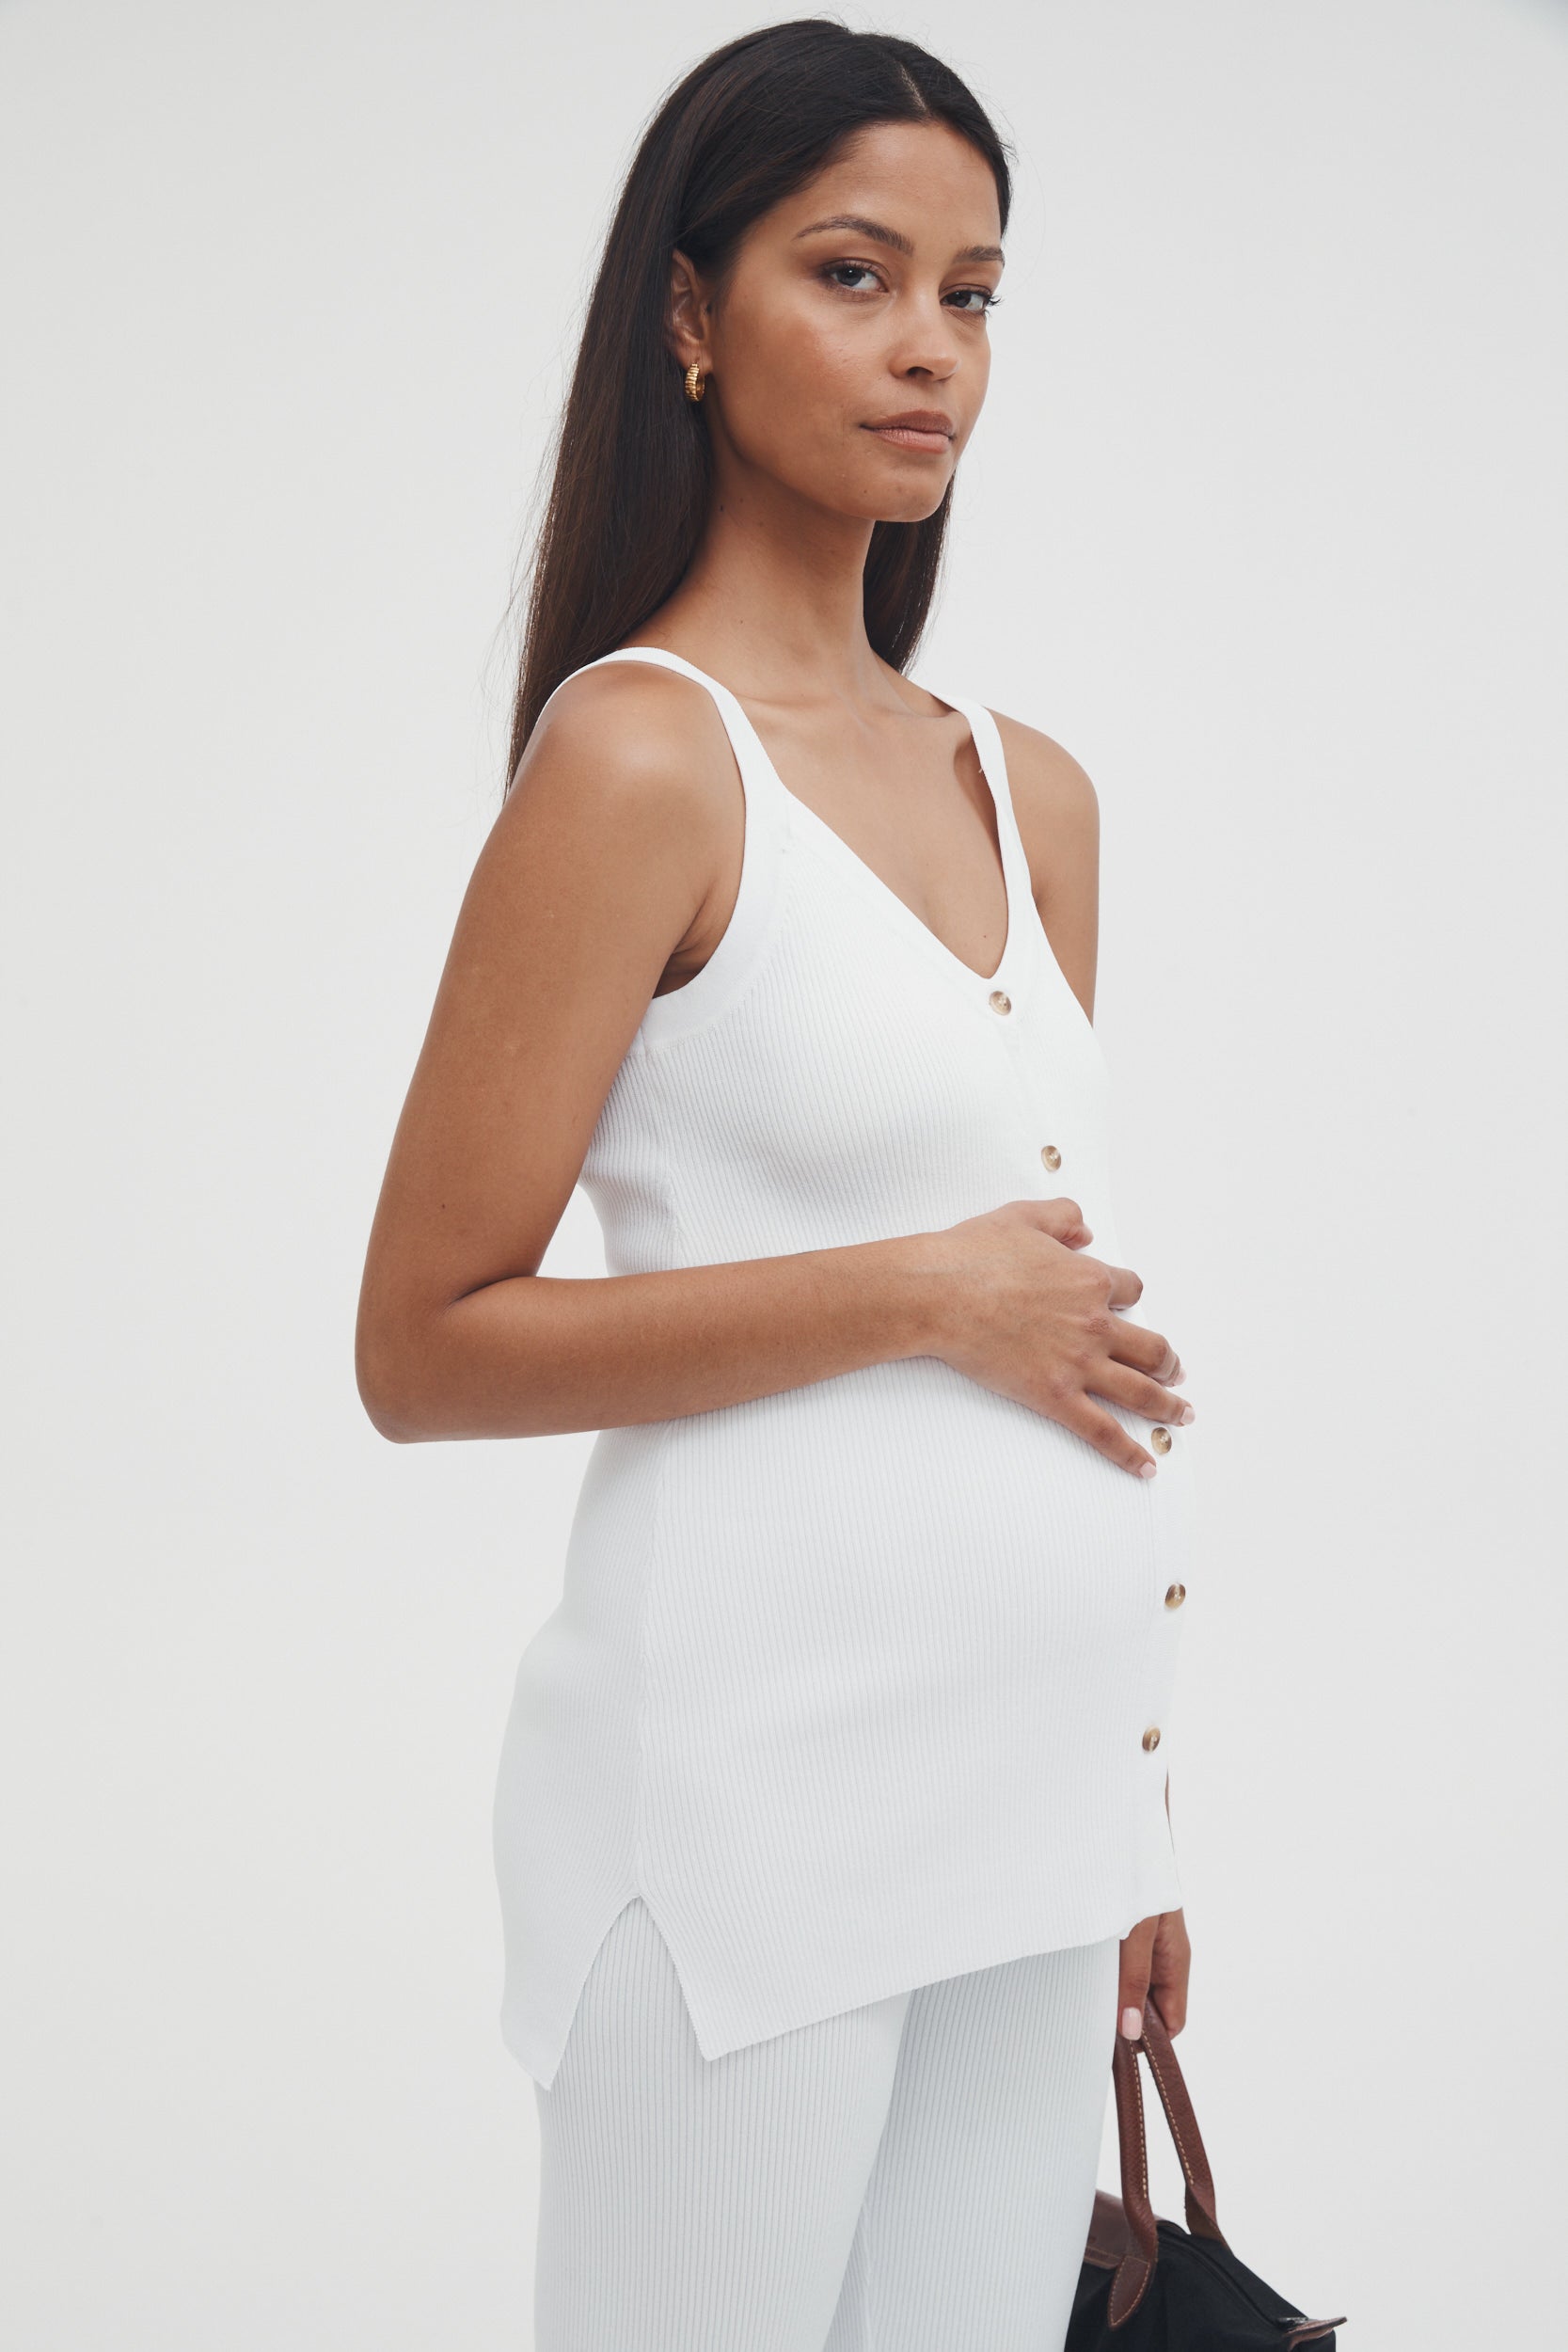 Nursing Tank Top – White with Lace Trim – Baby Birth and Beyond